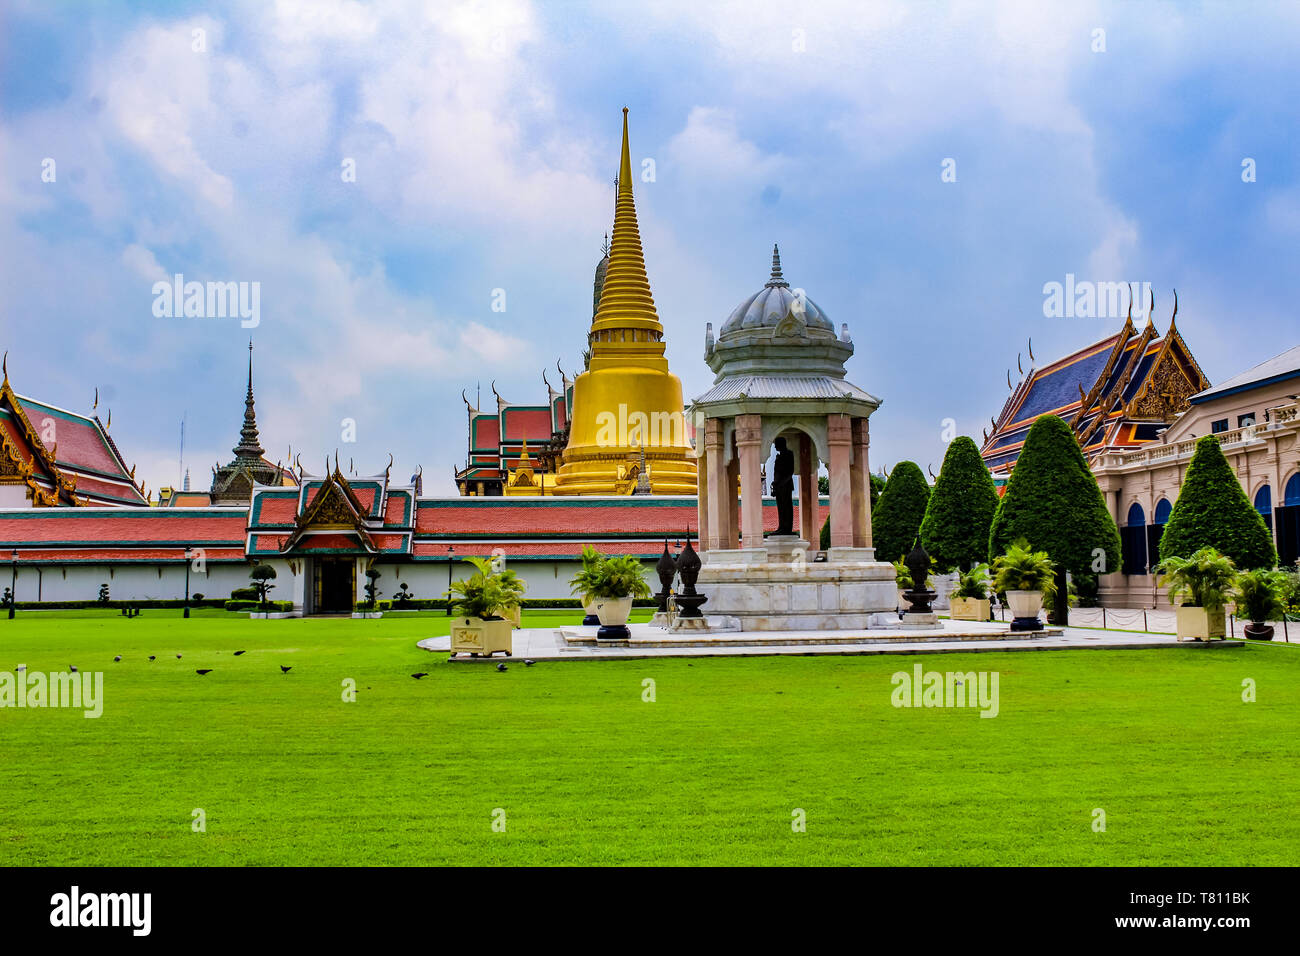 The Grand Palace and Wat Phra Kaew (Temple of the Emerald Buddha) complex, Bangkok, Thailand, Southeast Asia, Asia Stock Photo